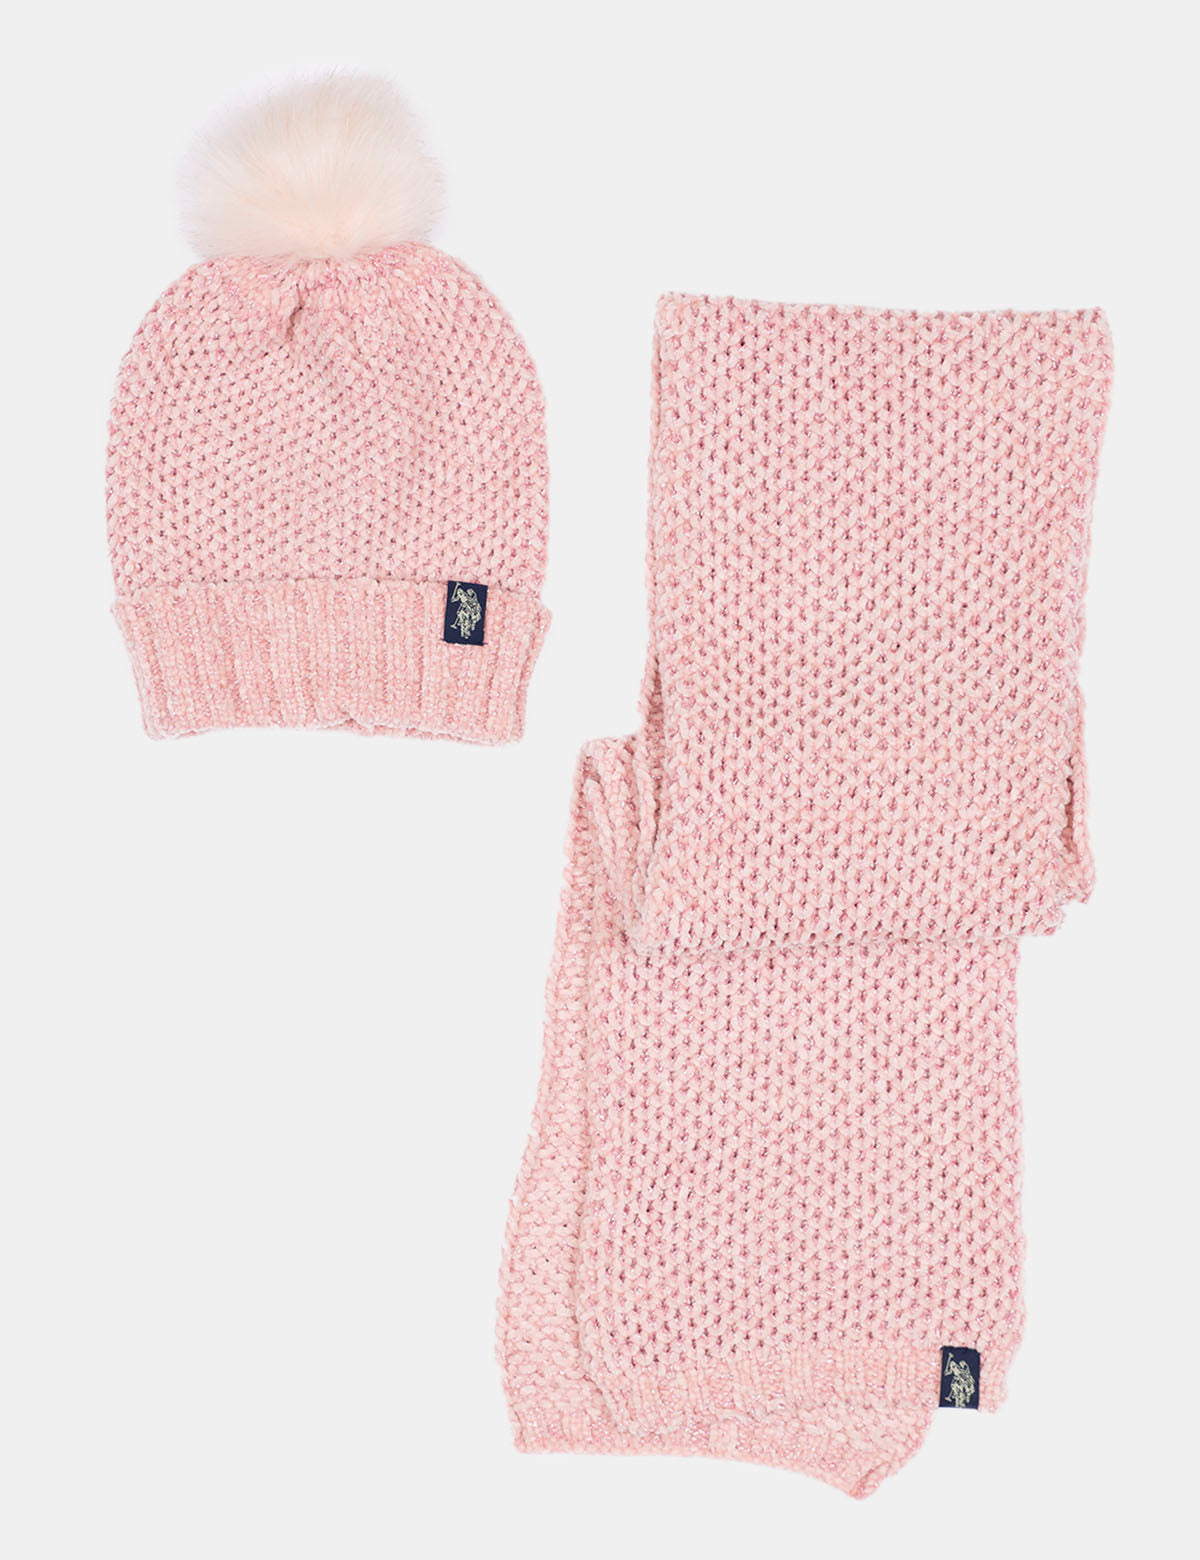 polo hat and glove set